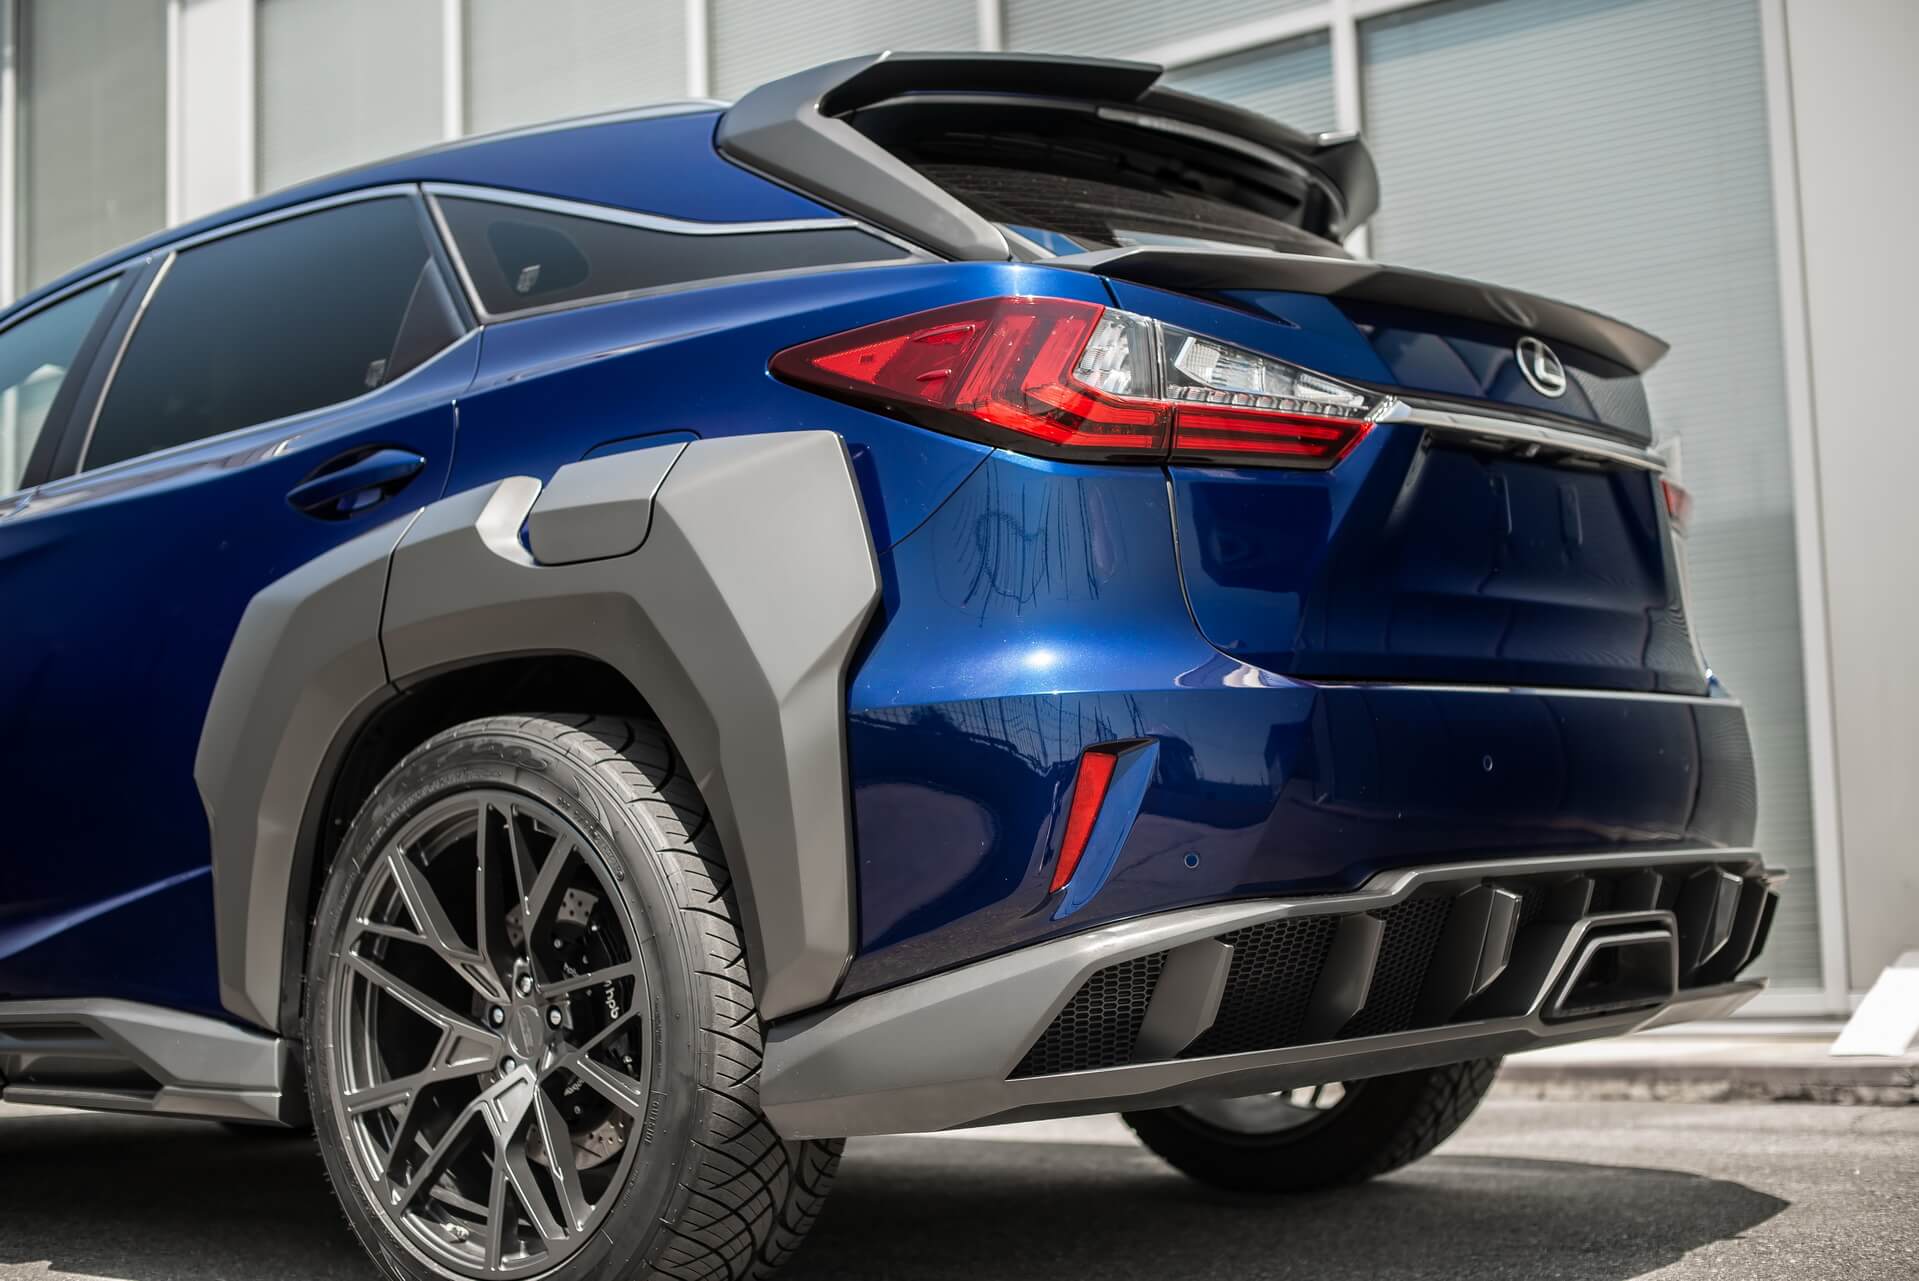 Check our price and buy an SCL Performance body kit for Lexus RX Goemon!